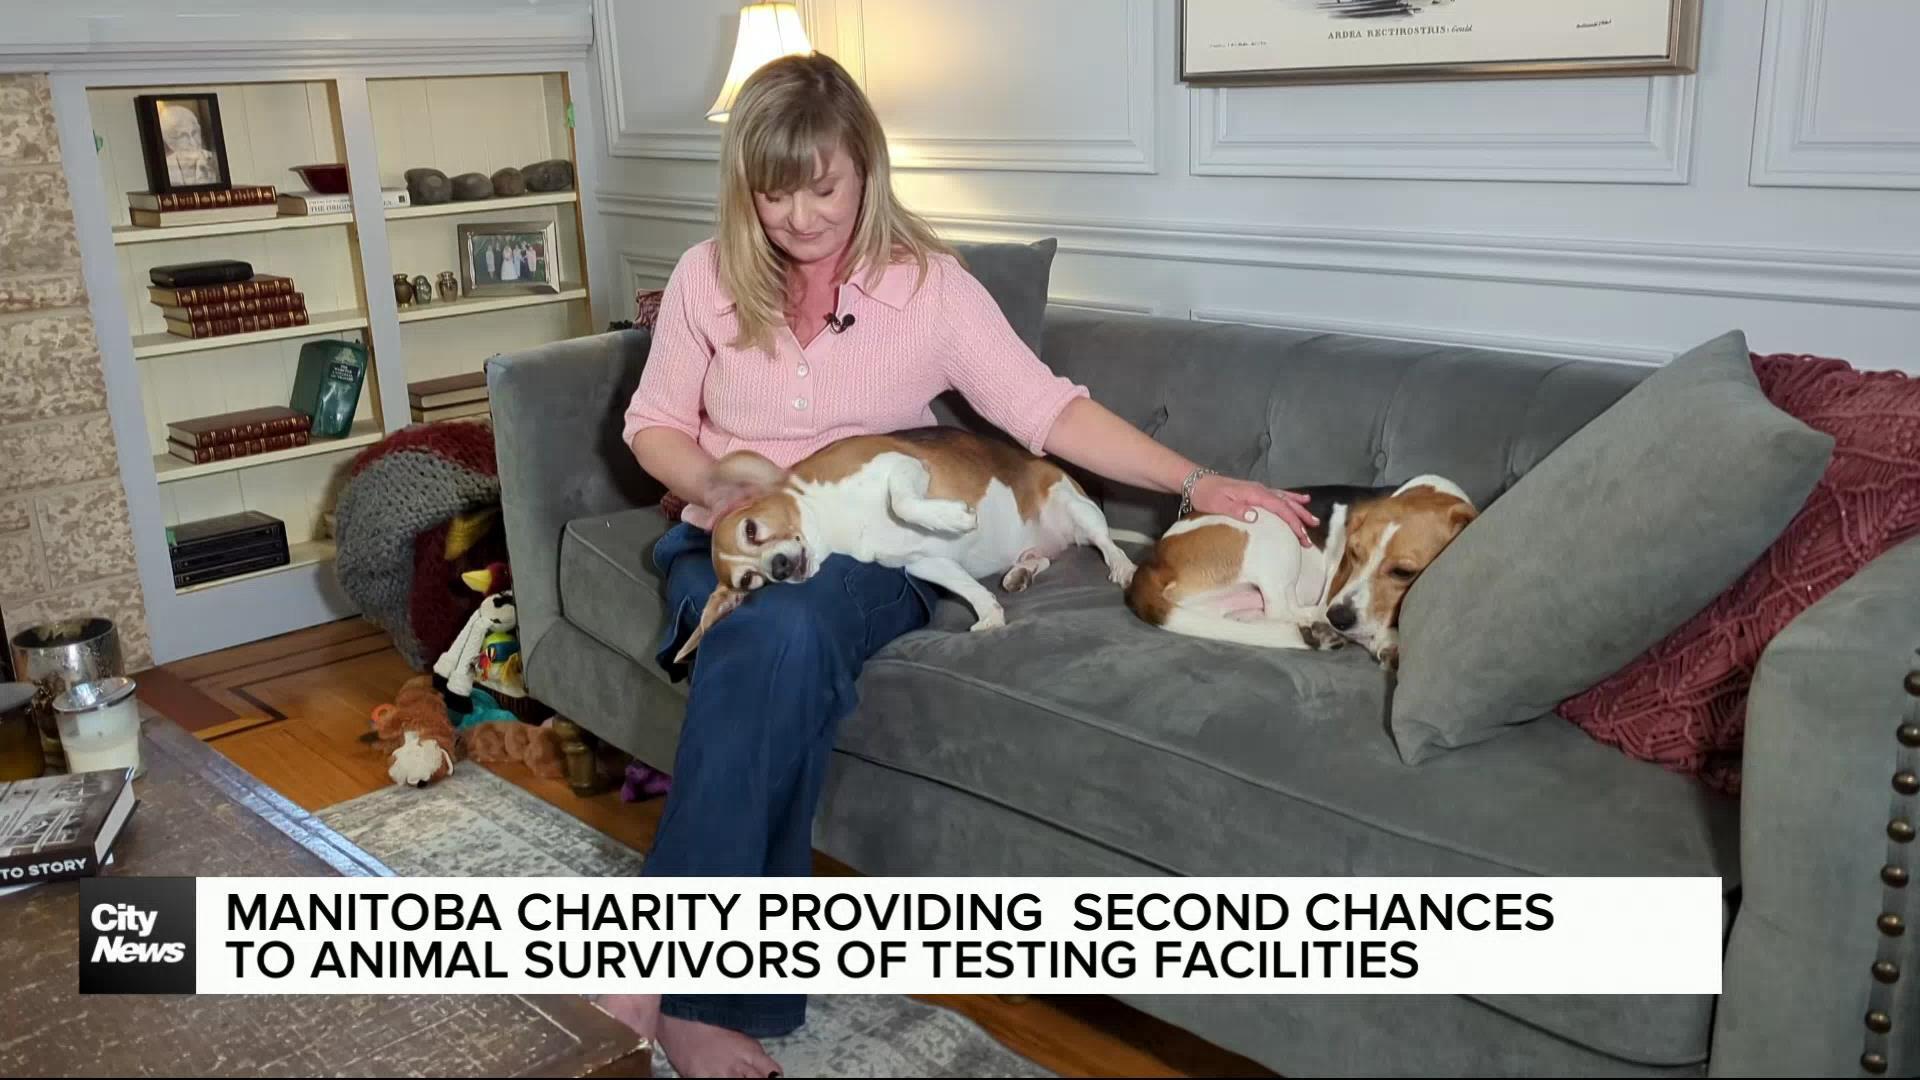 Manitoba Charity providing second chances for survivors of animal testing